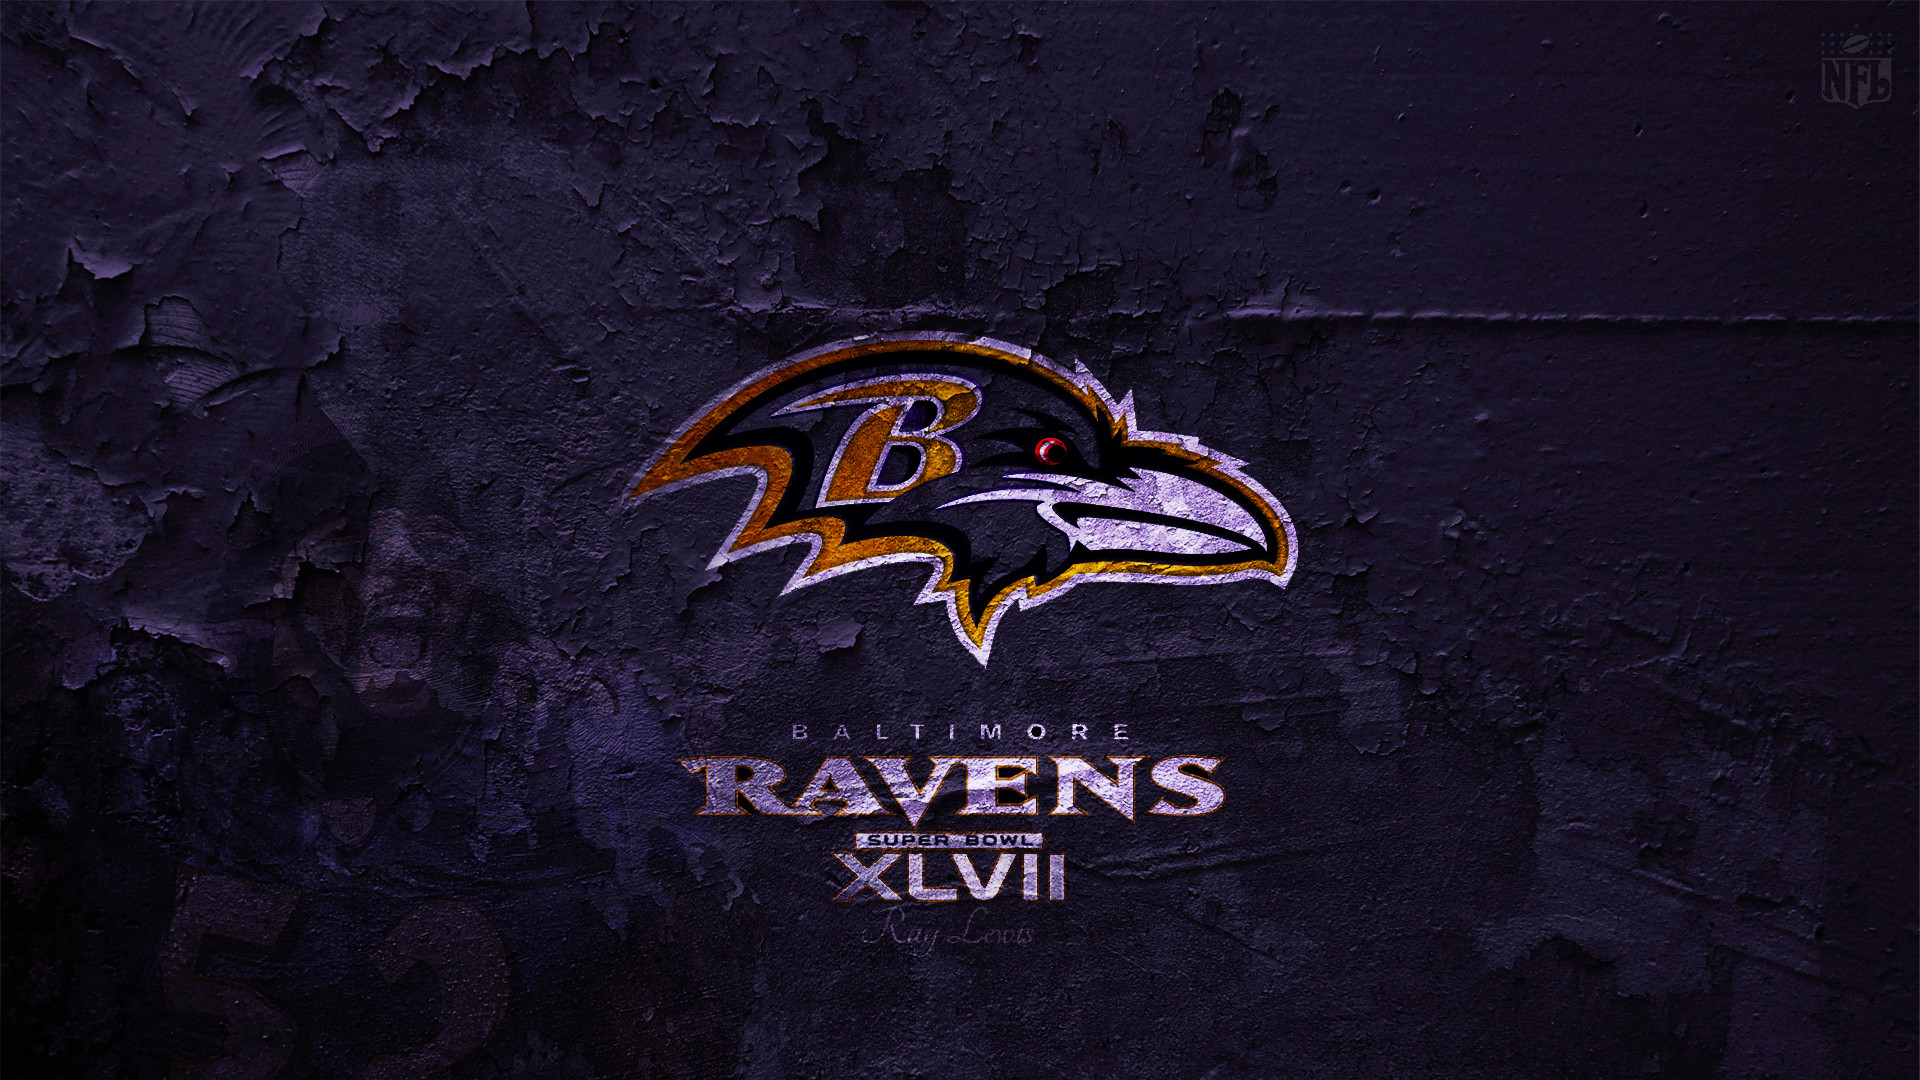 Related Wallpapers from Chicago Bears Wallpaper. Ravens Wallpaper